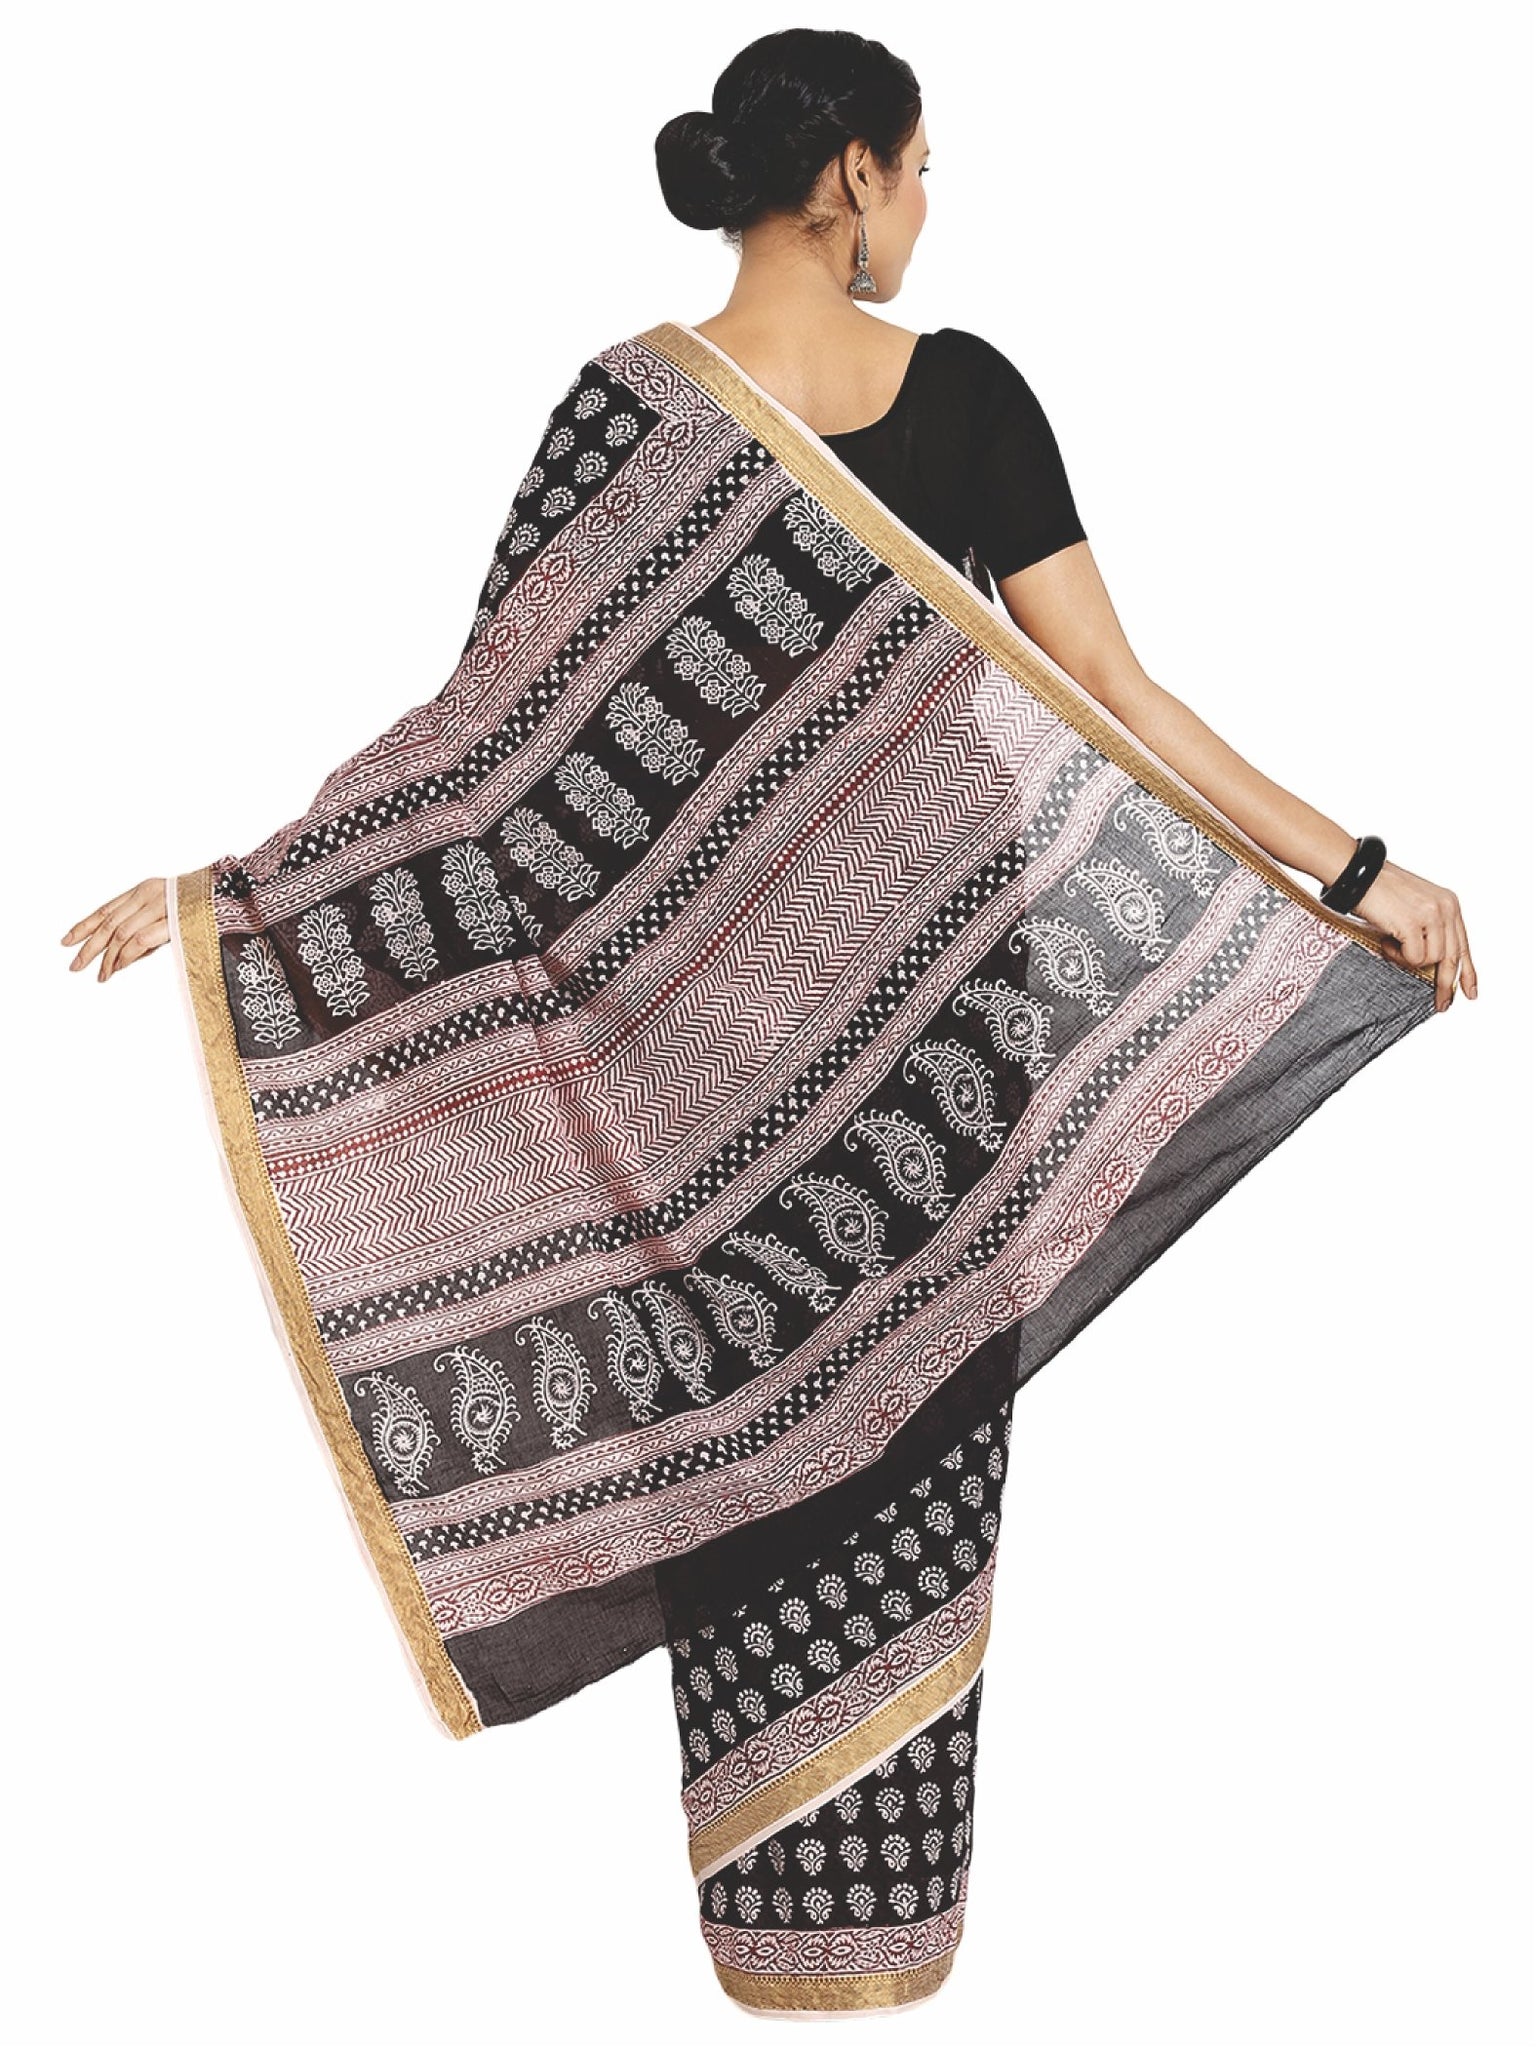 Black Cotton Hand Block Bagh Print Handcrafted Saree-Saree-Kalakari India-ZIBASA0054-Bagh, Cotton, Geographical Indication, Hand Blocks, Hand Crafted, Heritage Prints, Natural Dyes, Sarees, Sustainable Fabrics-[Linen,Ethnic,wear,Fashionista,Handloom,Handicraft,Indigo,blockprint,block,print,Cotton,Chanderi,Blue, latest,classy,party,bollywood,trendy,summer,style,traditional,formal,elegant,unique,style,hand,block,print, dabu,booti,gift,present,glamorous,affordable,collectible,Sari,Saree,printed, ho